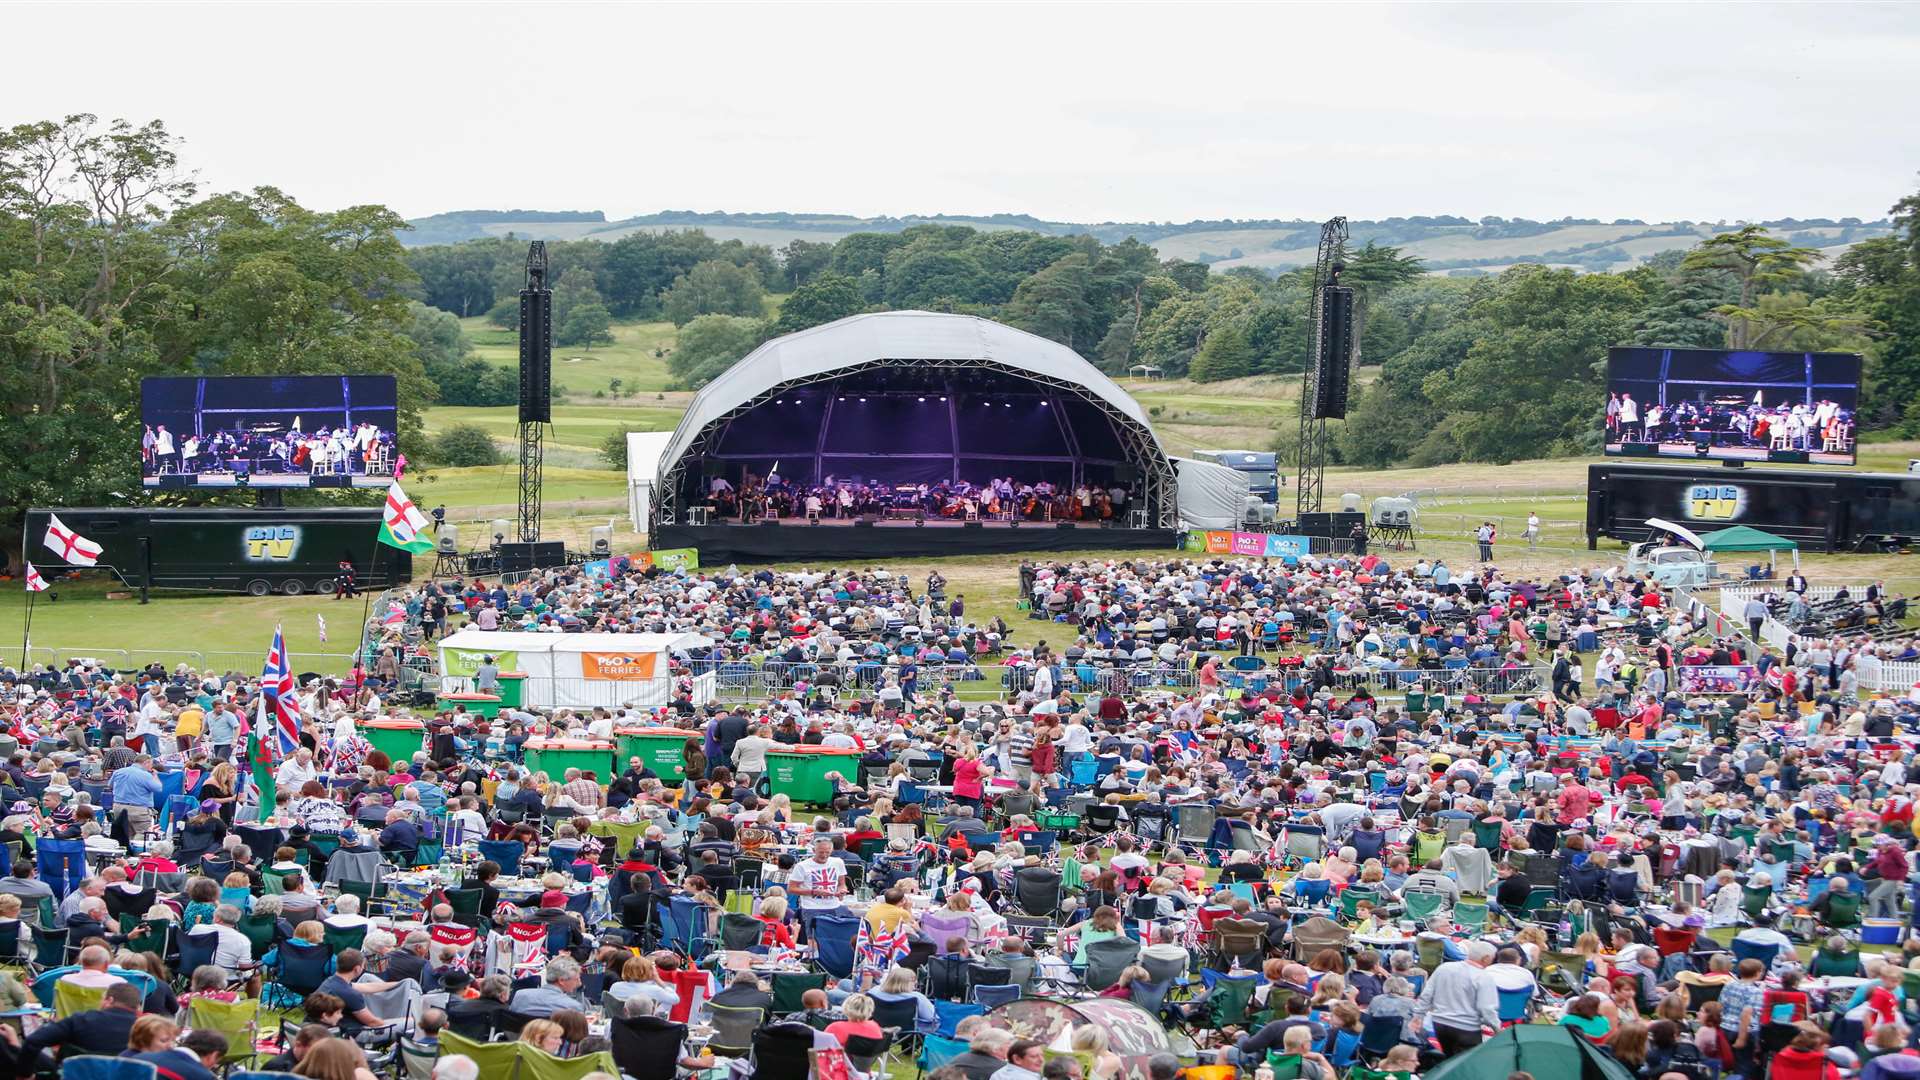 Thousands gathered for the Leeds Castle Classical Concert